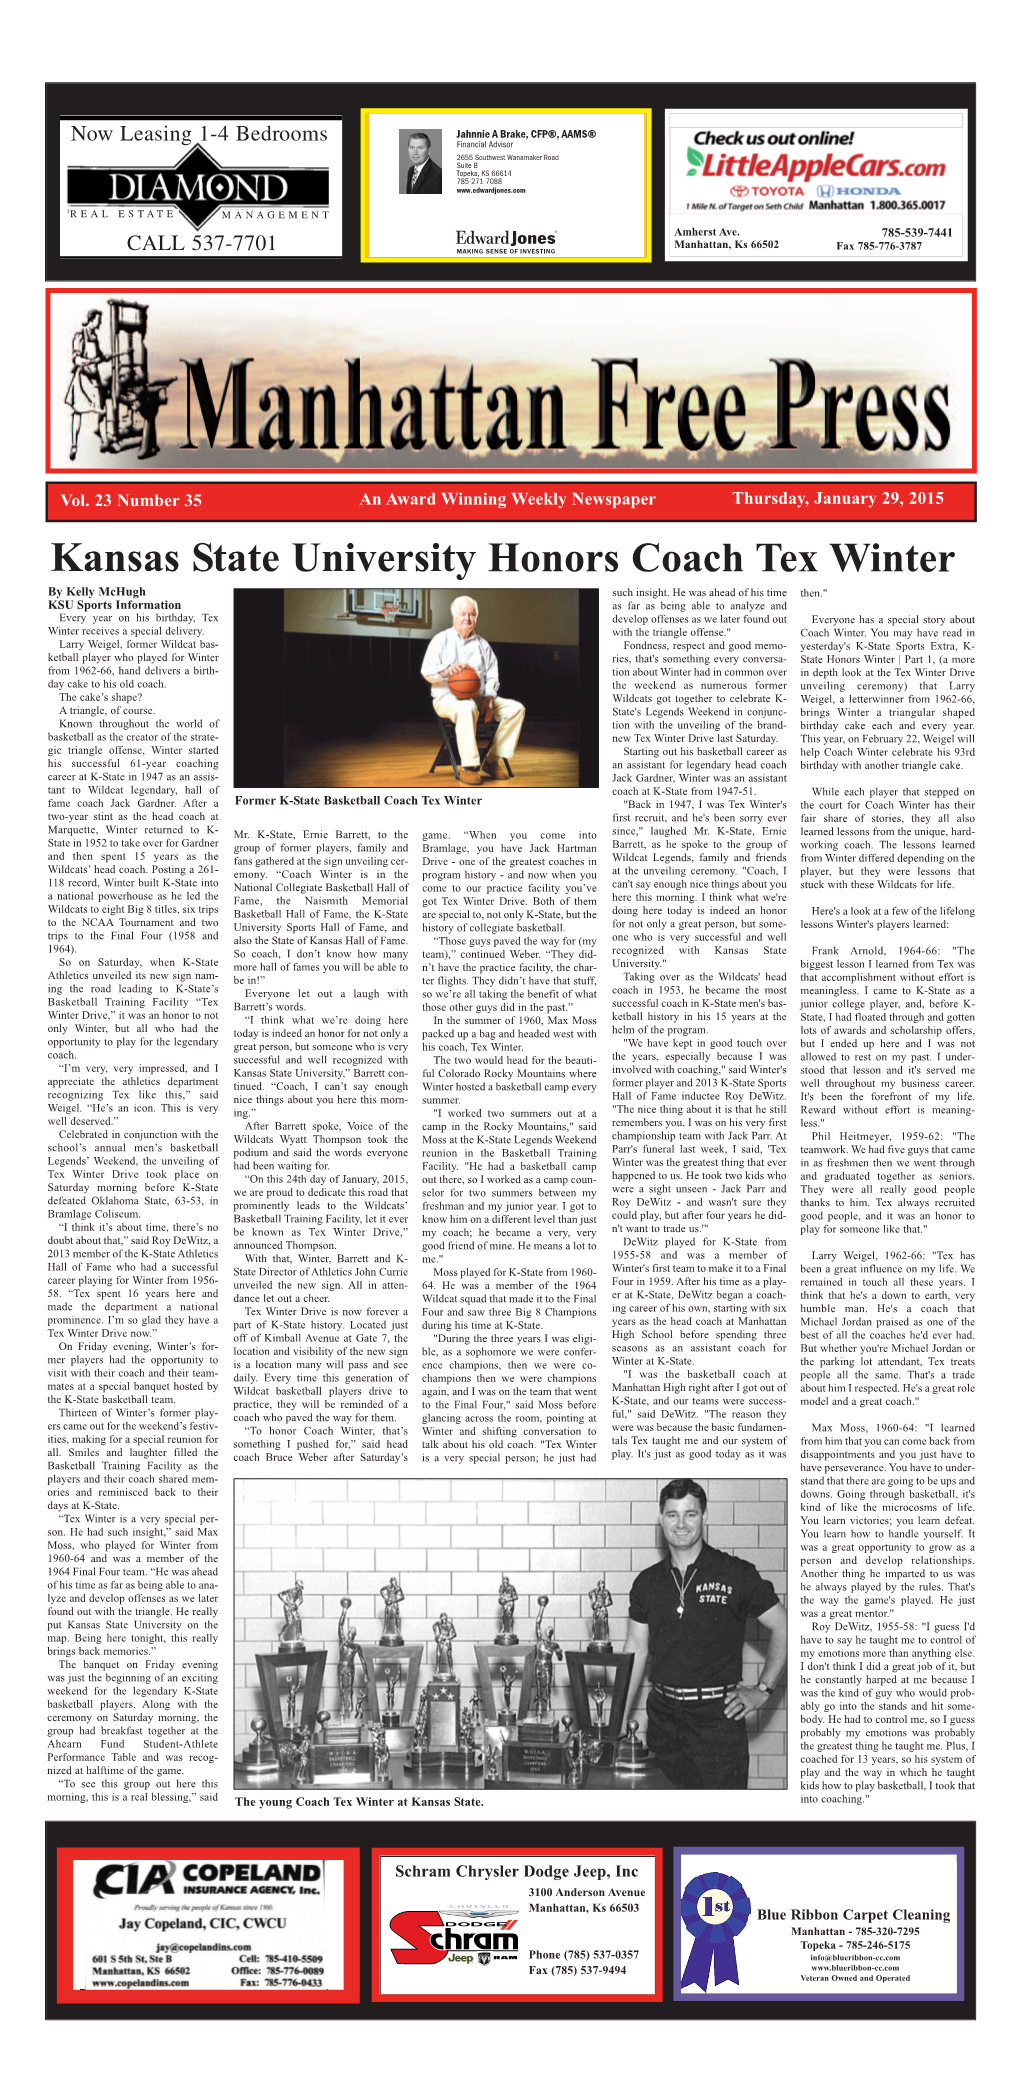 Kansas State University Honors Coach Tex Winter by Kelly Mchugh Such Insight